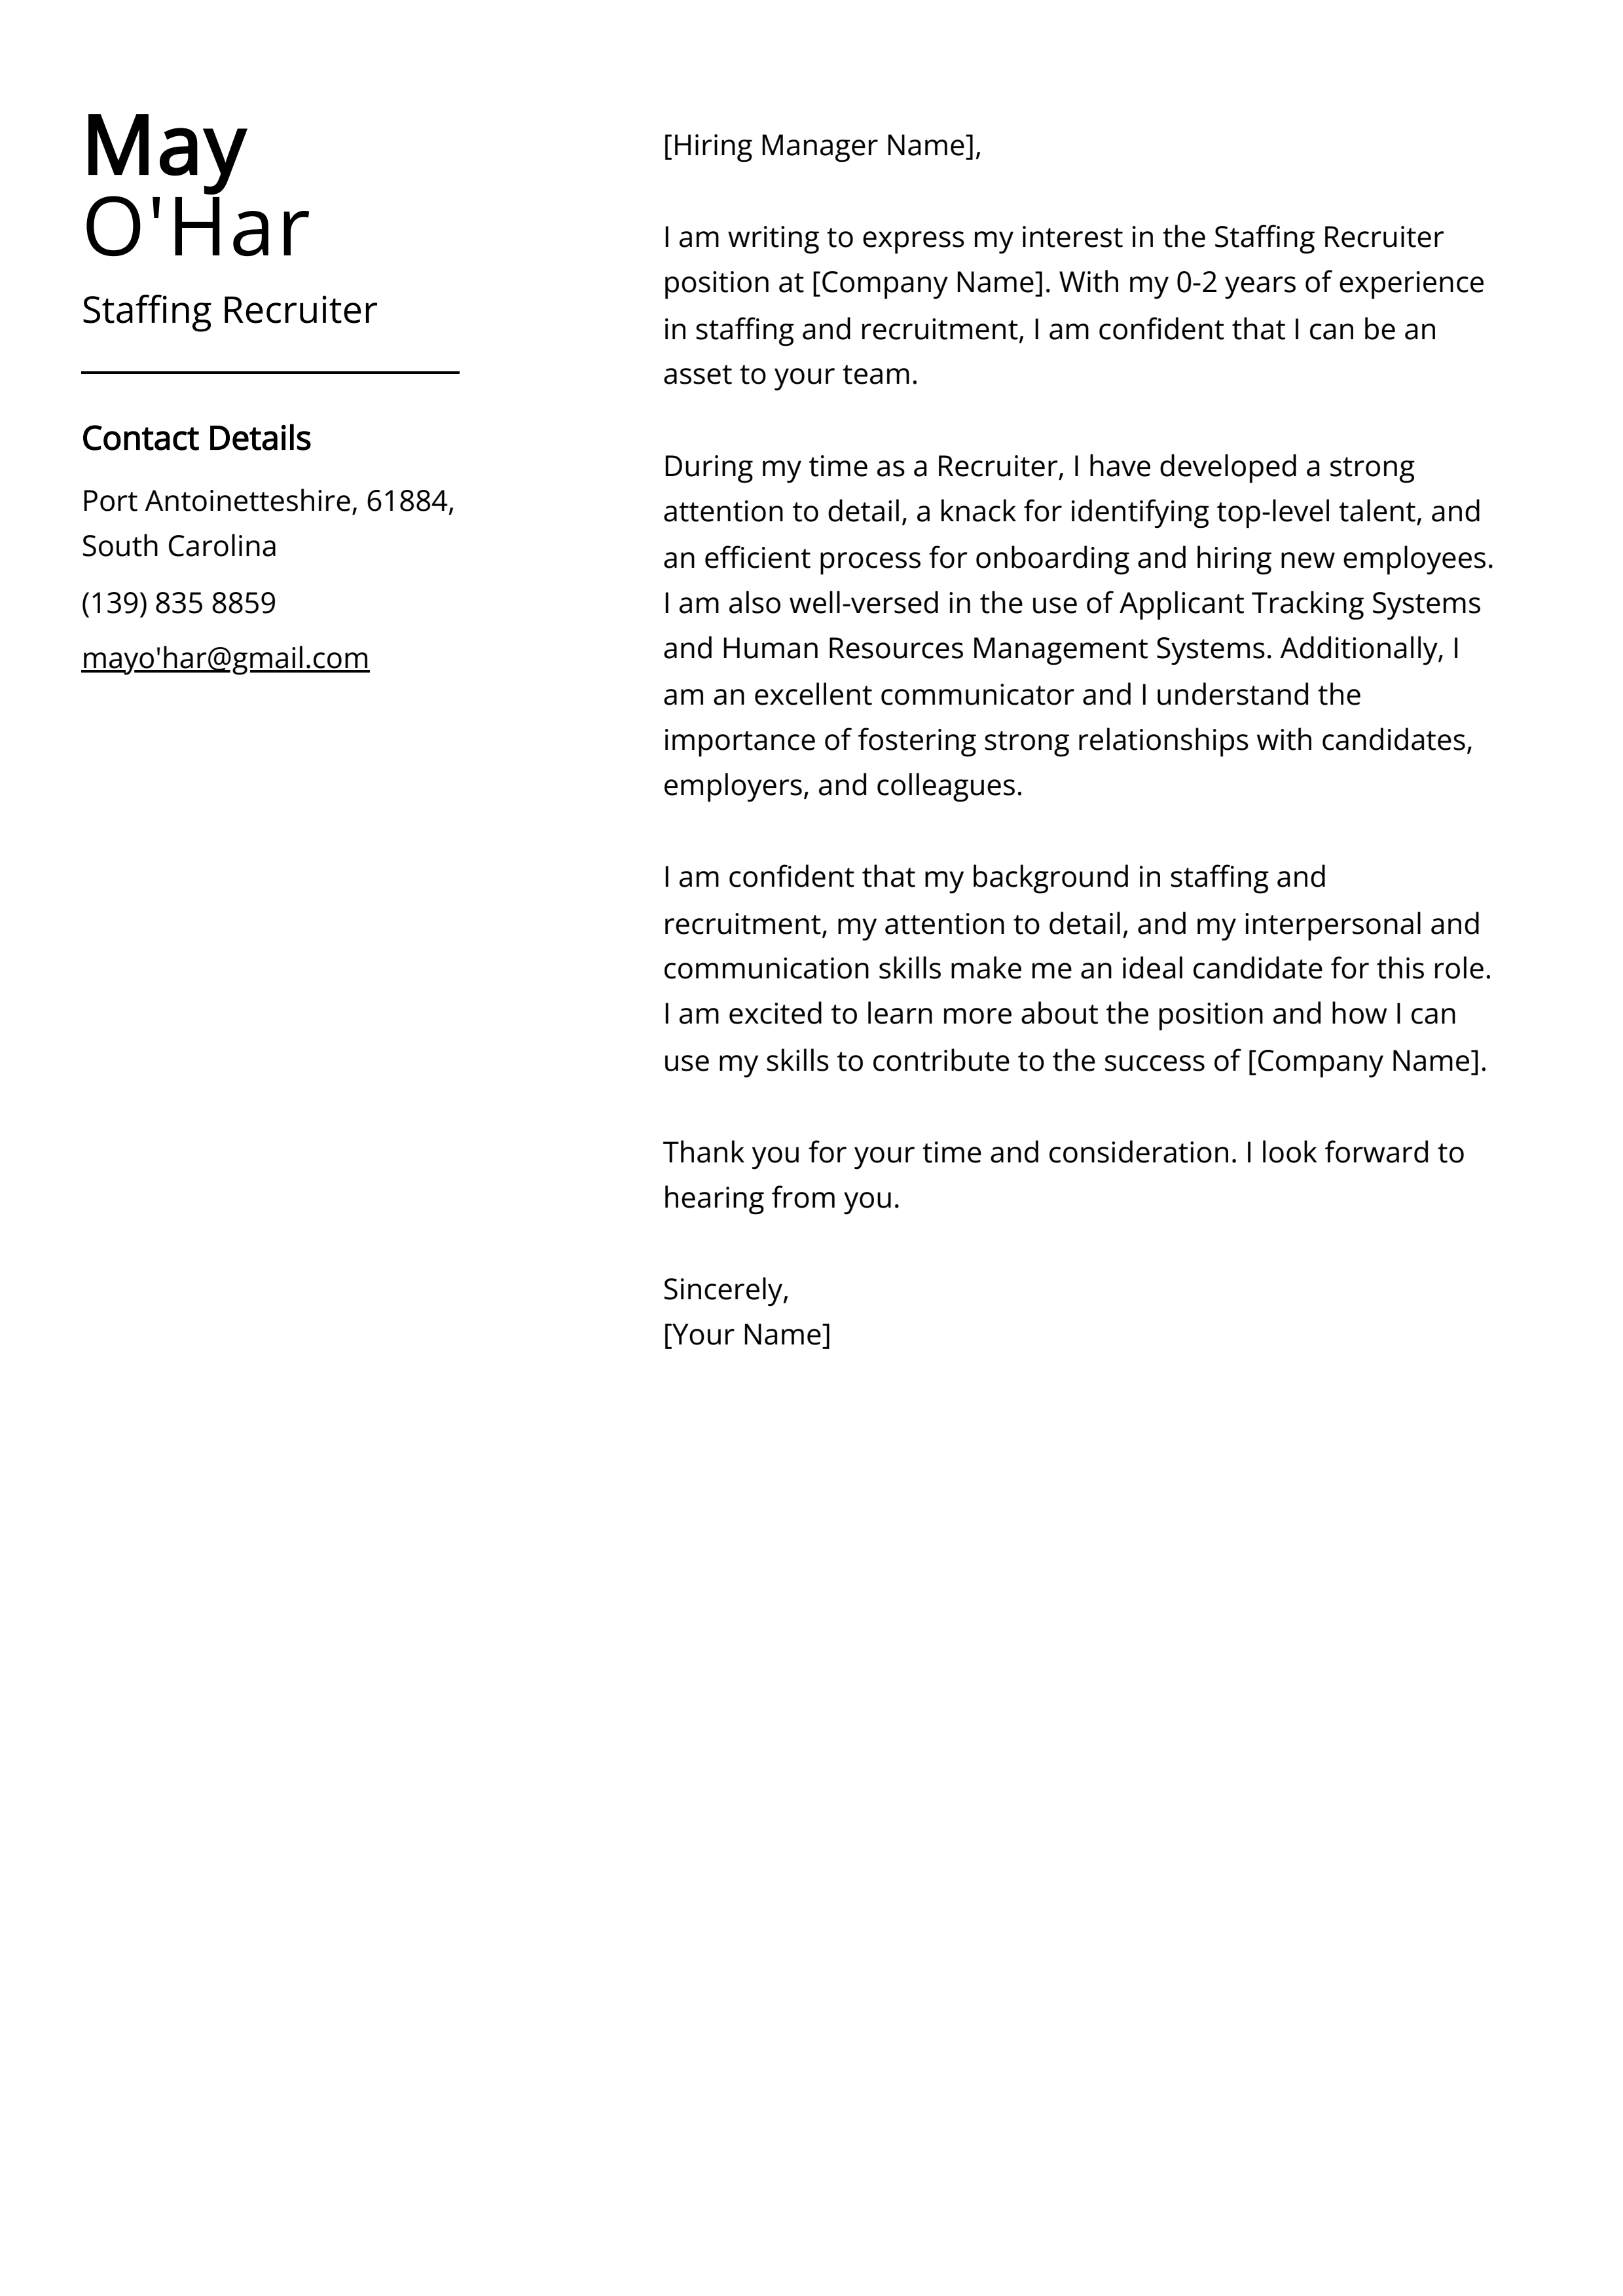 Staffing Recruiter Cover Letter Example